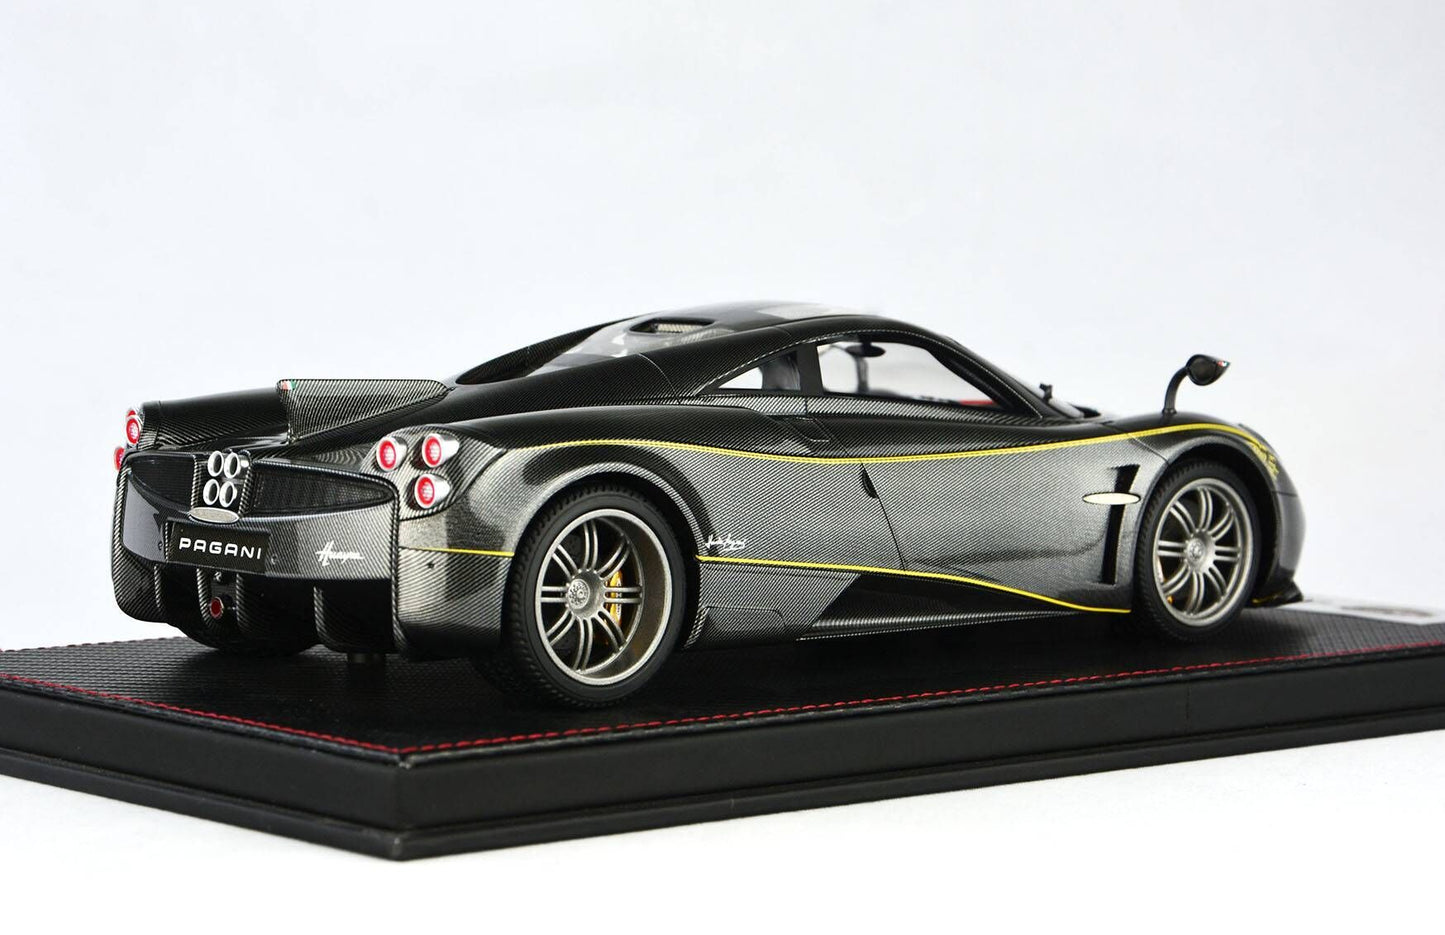 Frontiart AvanStyle 1:18 Pagani Huayra Carbon fiber Gray AS016-13